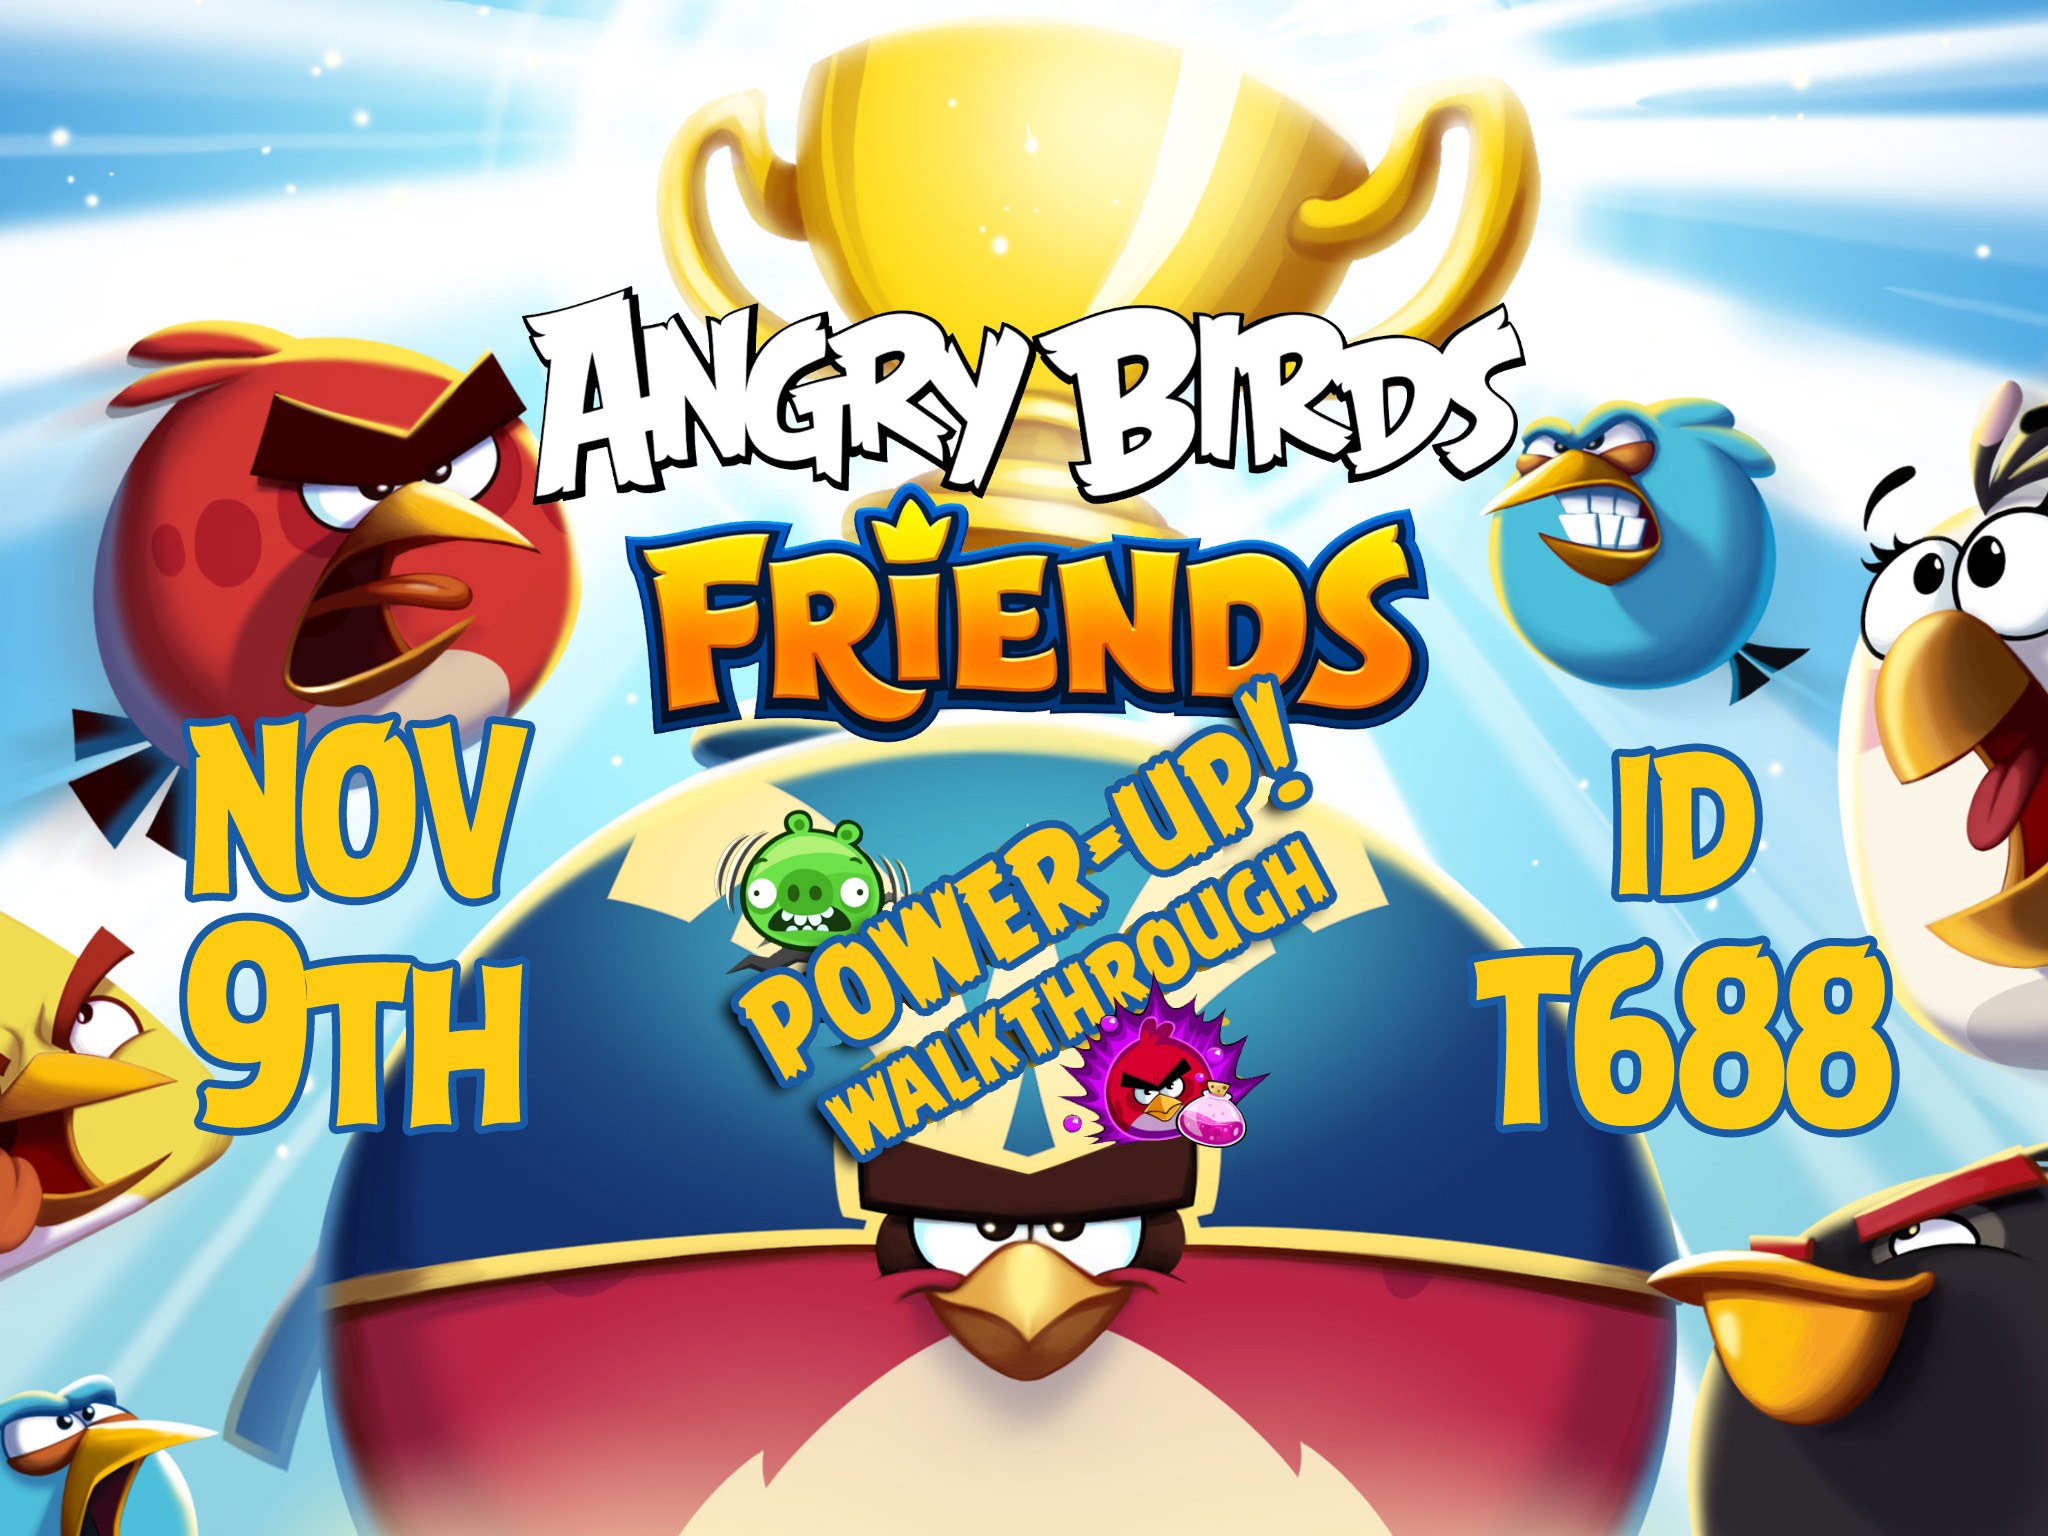 Angry-Birds-Friends-Tournament-T688-Feature-Image-PU